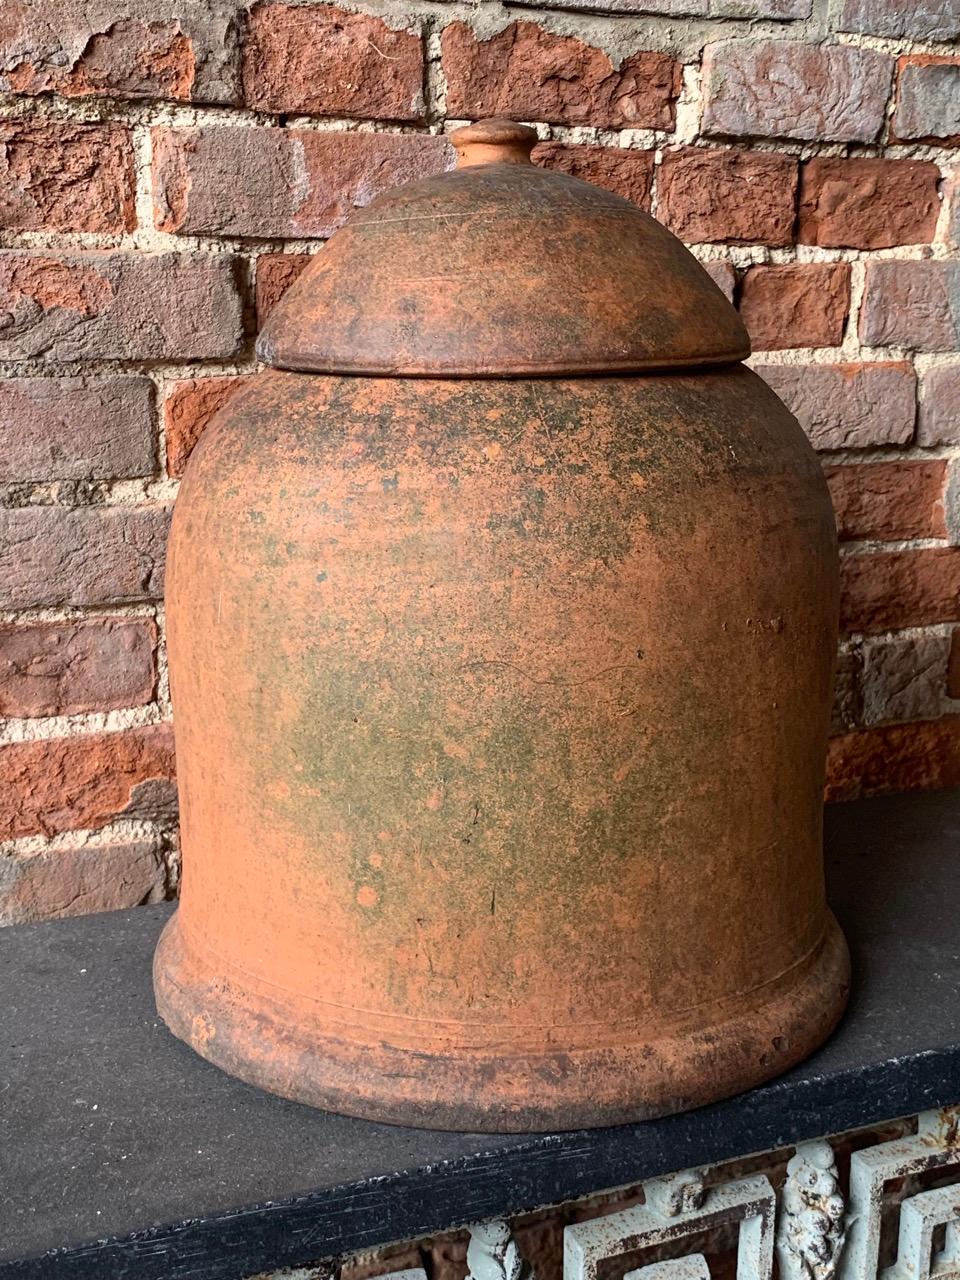 A nice late Victorian terracotta Rhubarb forcer with original lid which are often missing. The terracotta has a nice weathered patina. 
These were placed over the Rhubarb to force it to seek the light which makes the stems grow longer and also makes